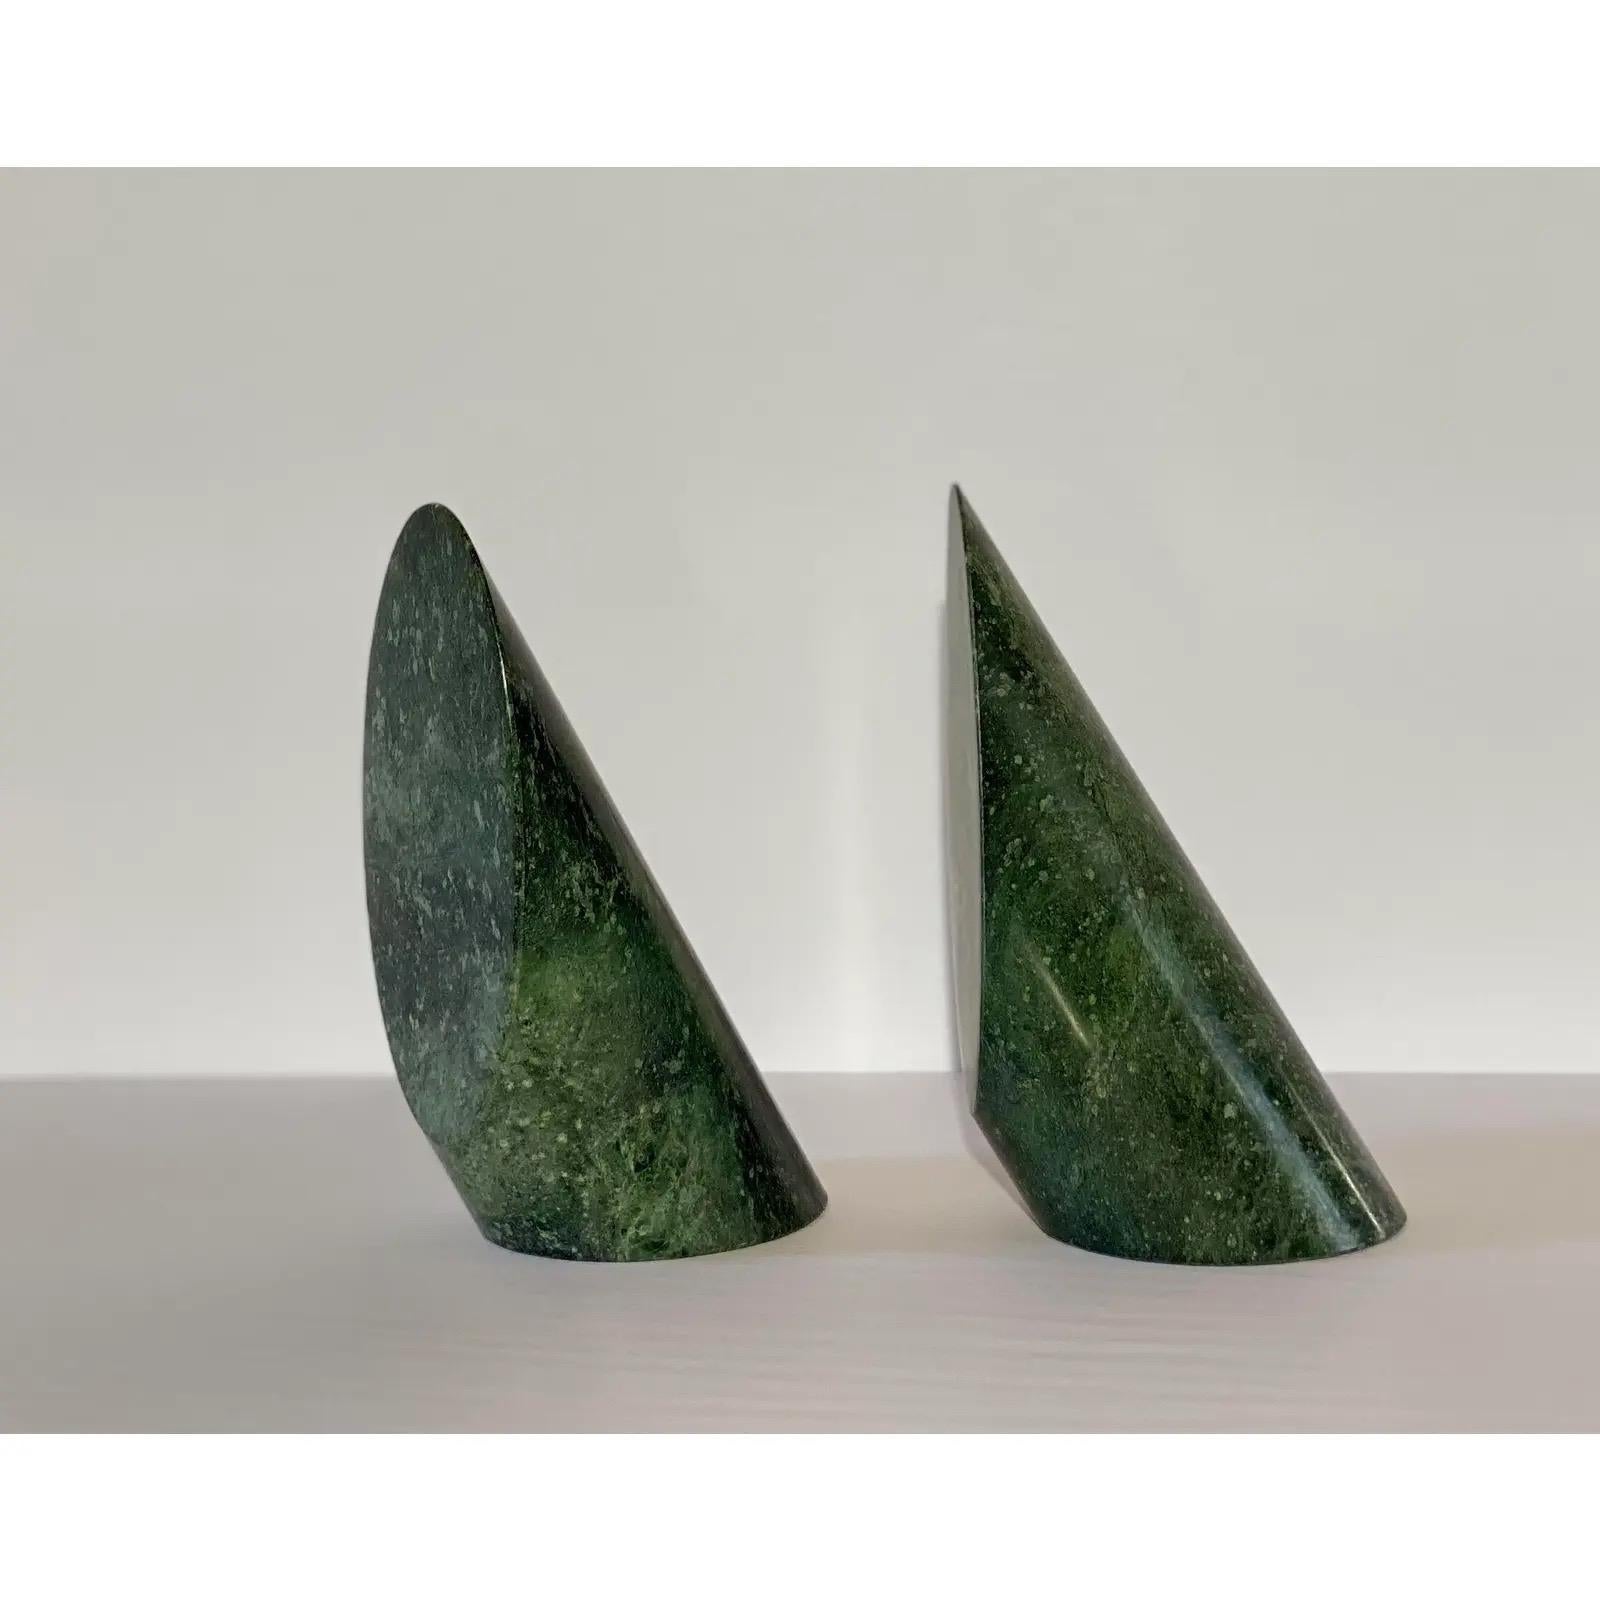 Unknown Vintage Green Cylinder Marble Bookends, a Pair